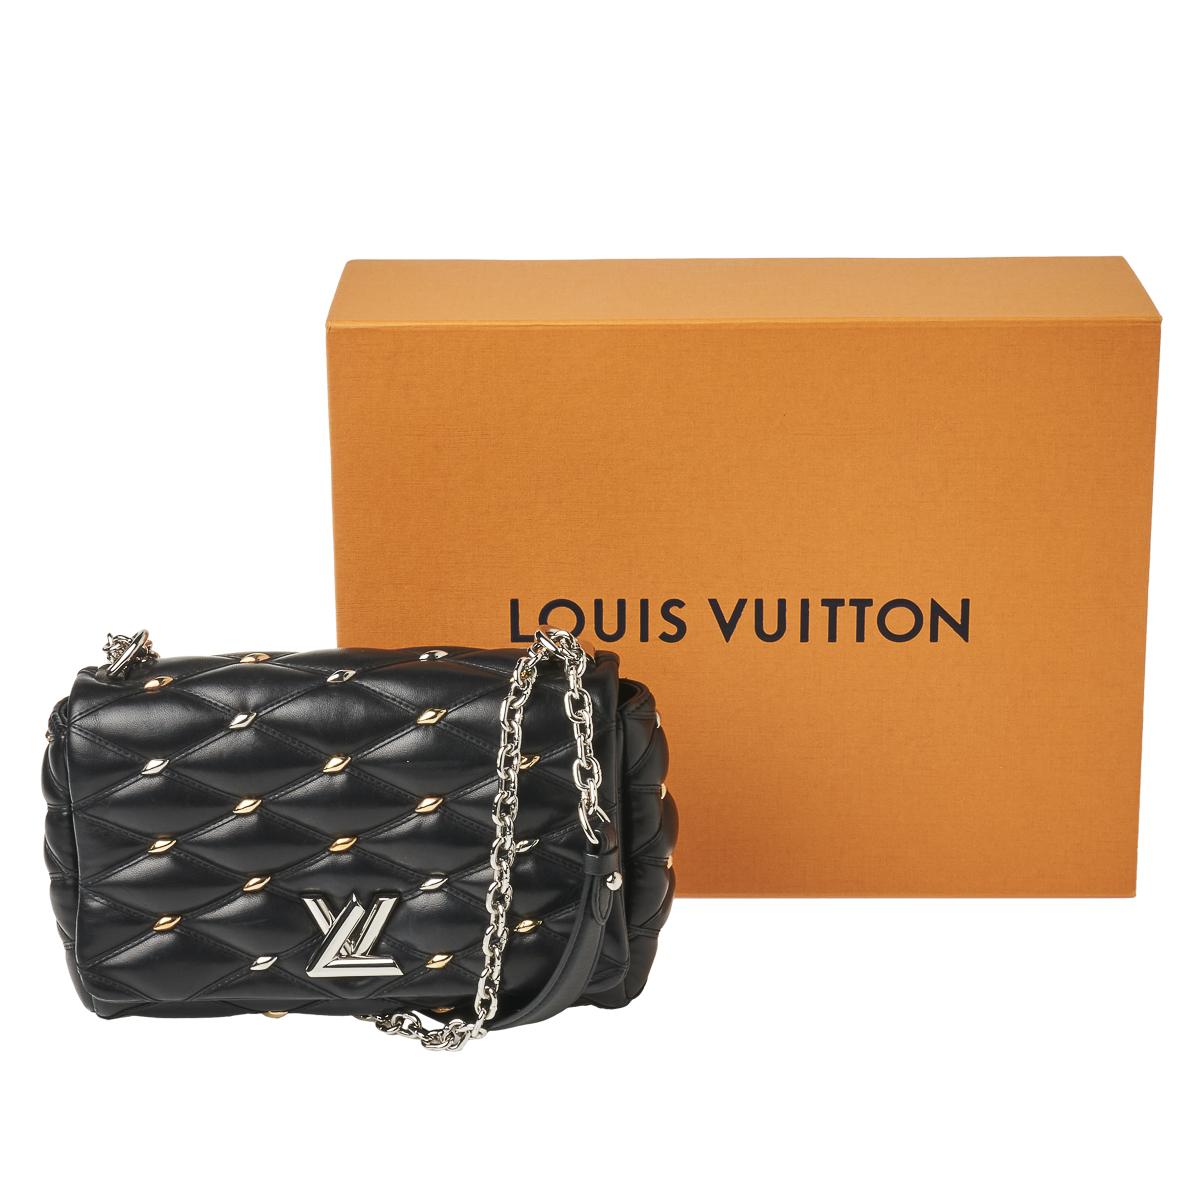 Louis Vuitton Black Quilted Studded Leather GO-14 Malletage PM Bag